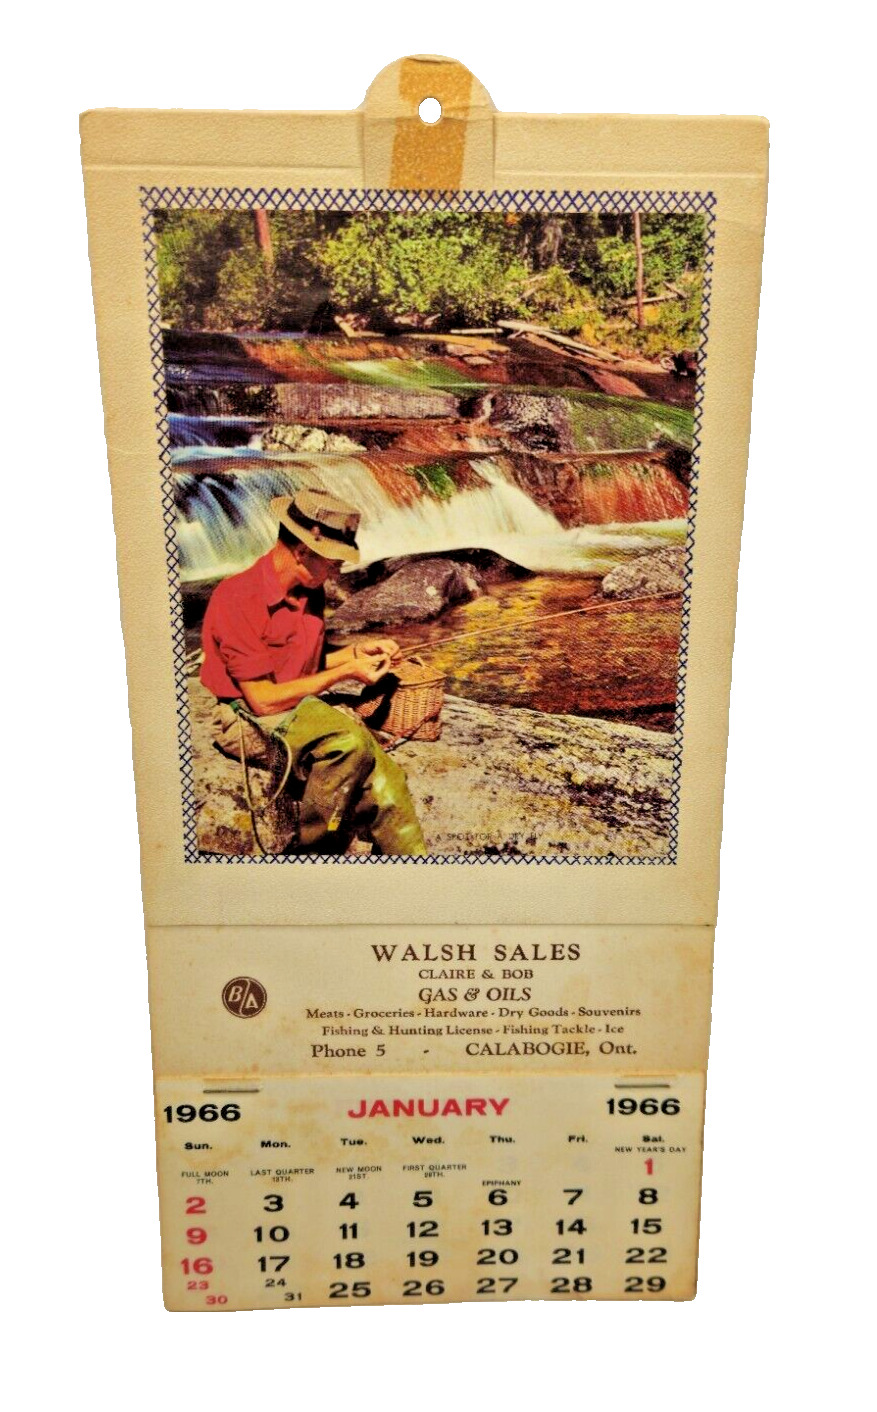 VTG 1966 Calendar Trout Fishing Scene Ontario Canada WALSH SALES GAS OIL STORE